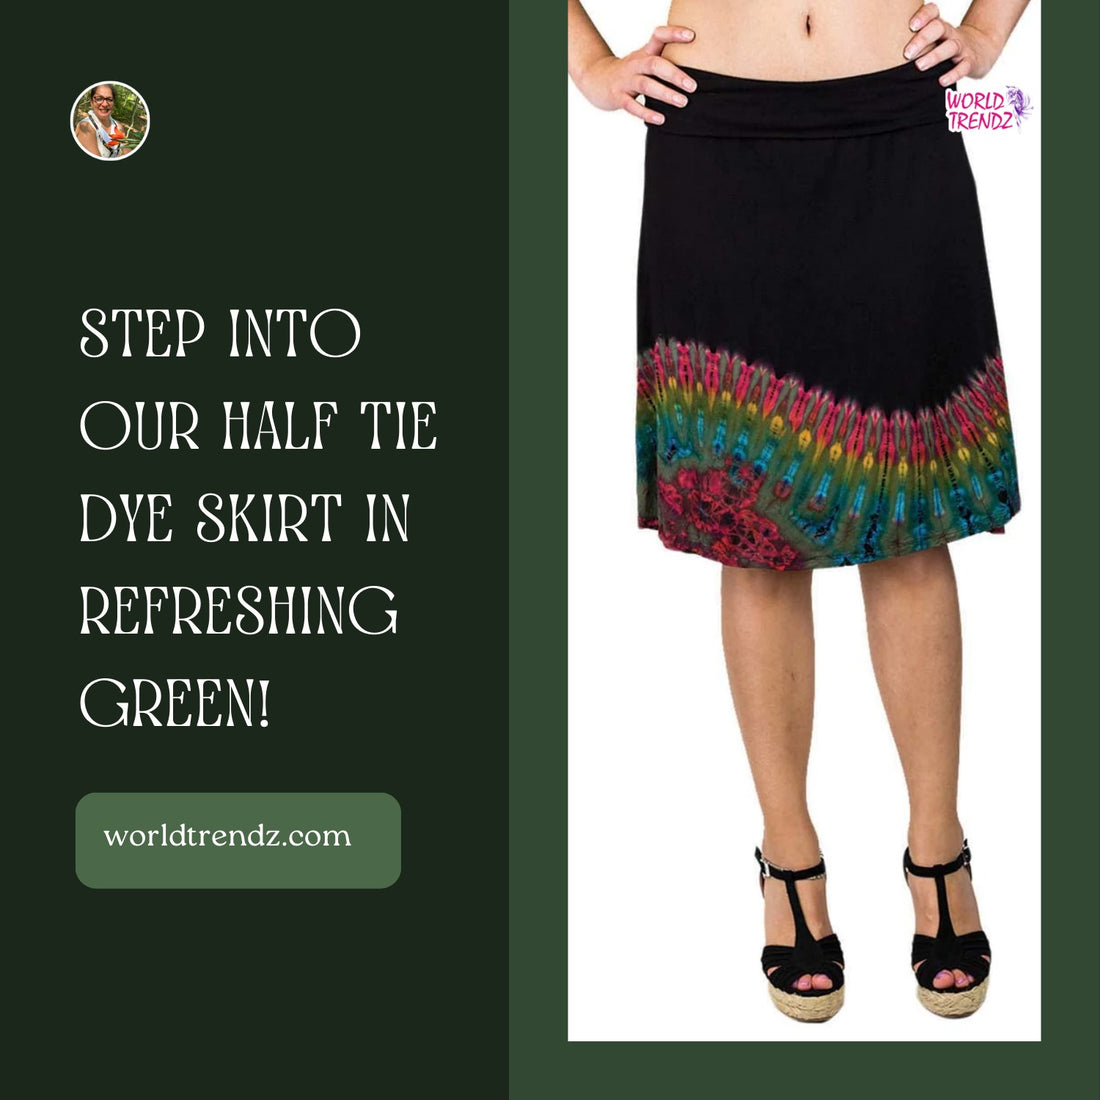 Turn Heads with the Half Tie Dye Skirt Green: Your Ultimate Fashion Must-Have!